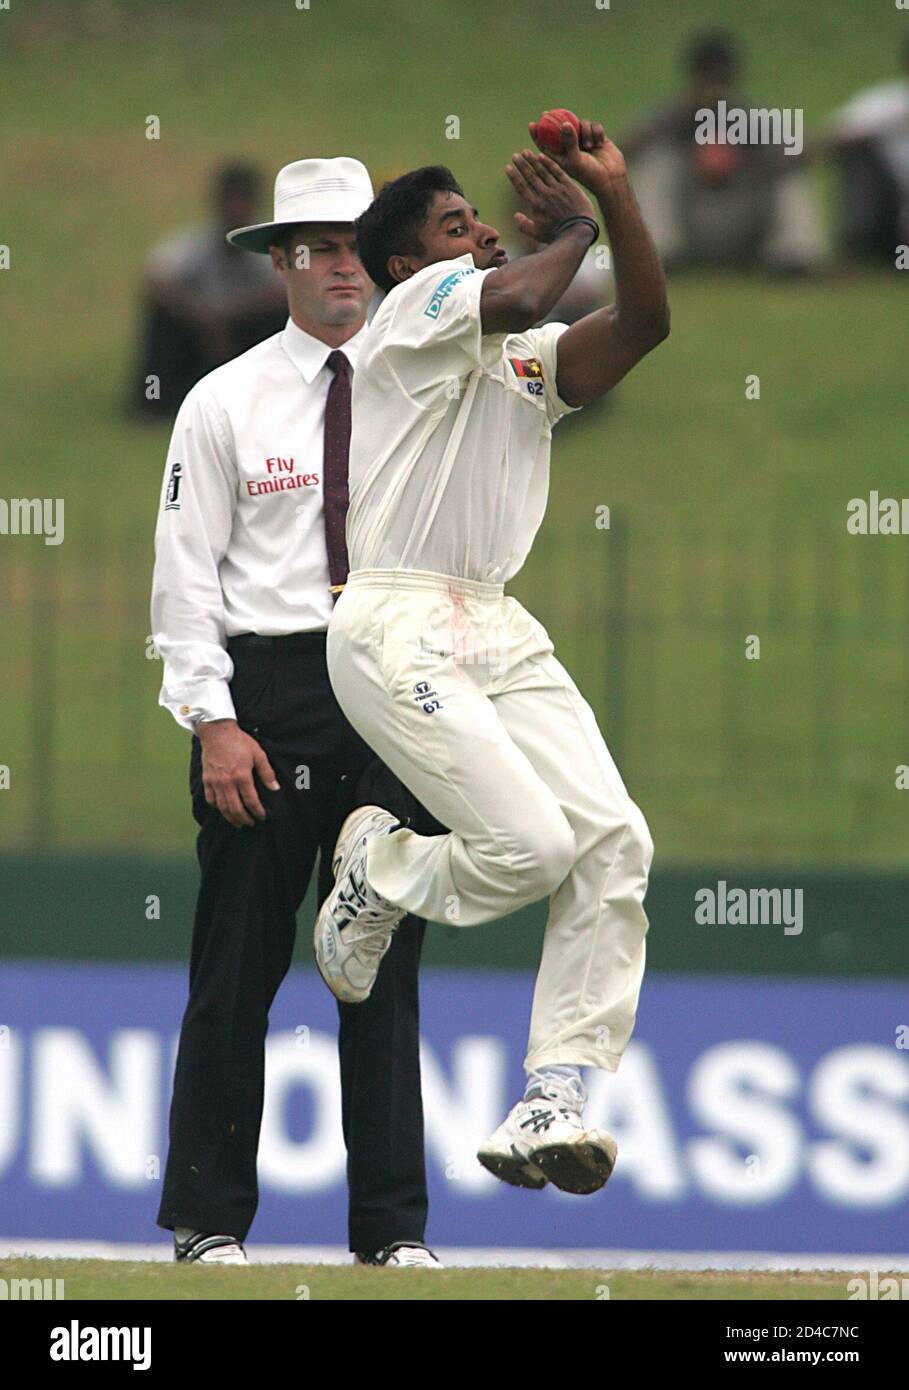 Sri Lankan fast bowler Chaminda Vaas pitches a delivery as Australian umpire Simon Taufel looks on during the third day of the first test cricket match against West Indies in Colombo, Sri Lanka July 15, 2005. REUTERS/Anuruddha Lokuhapuarachchi  AL/KS Stock Photo